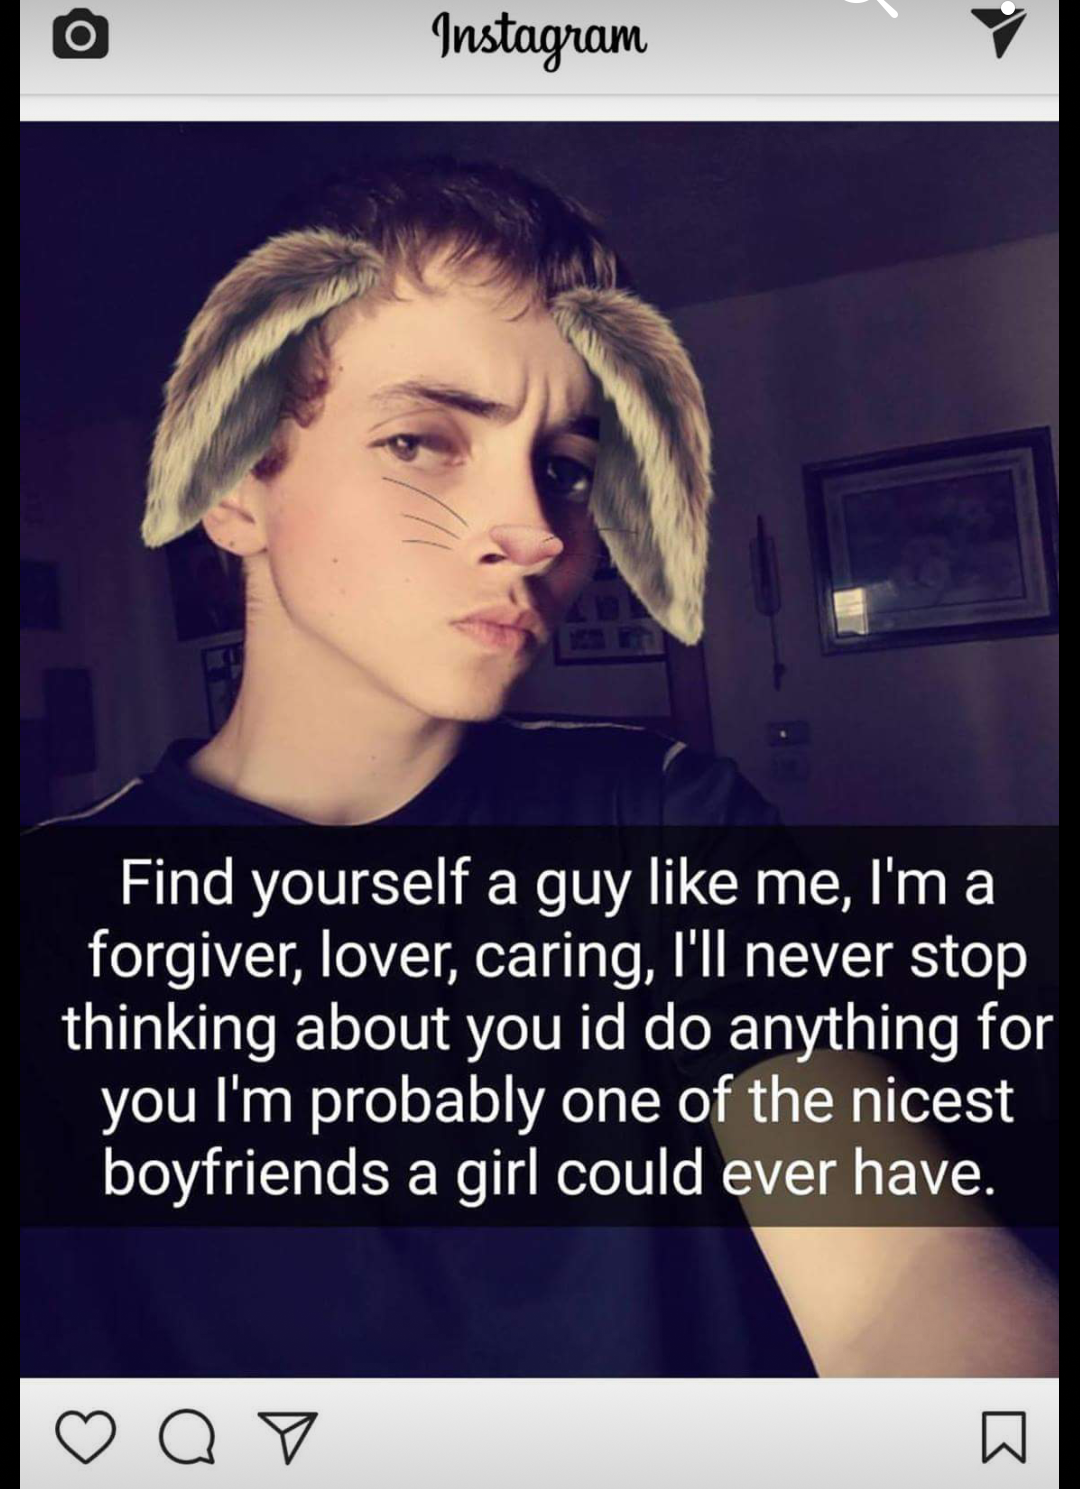 white knight nice guy - Instagram Find yourself a guy me, I'm a forgiver, lover, caring, I'll never stop thinking about you id do anything for you I'm probably one of the nicest boyfriends a girl could ever have. Q v